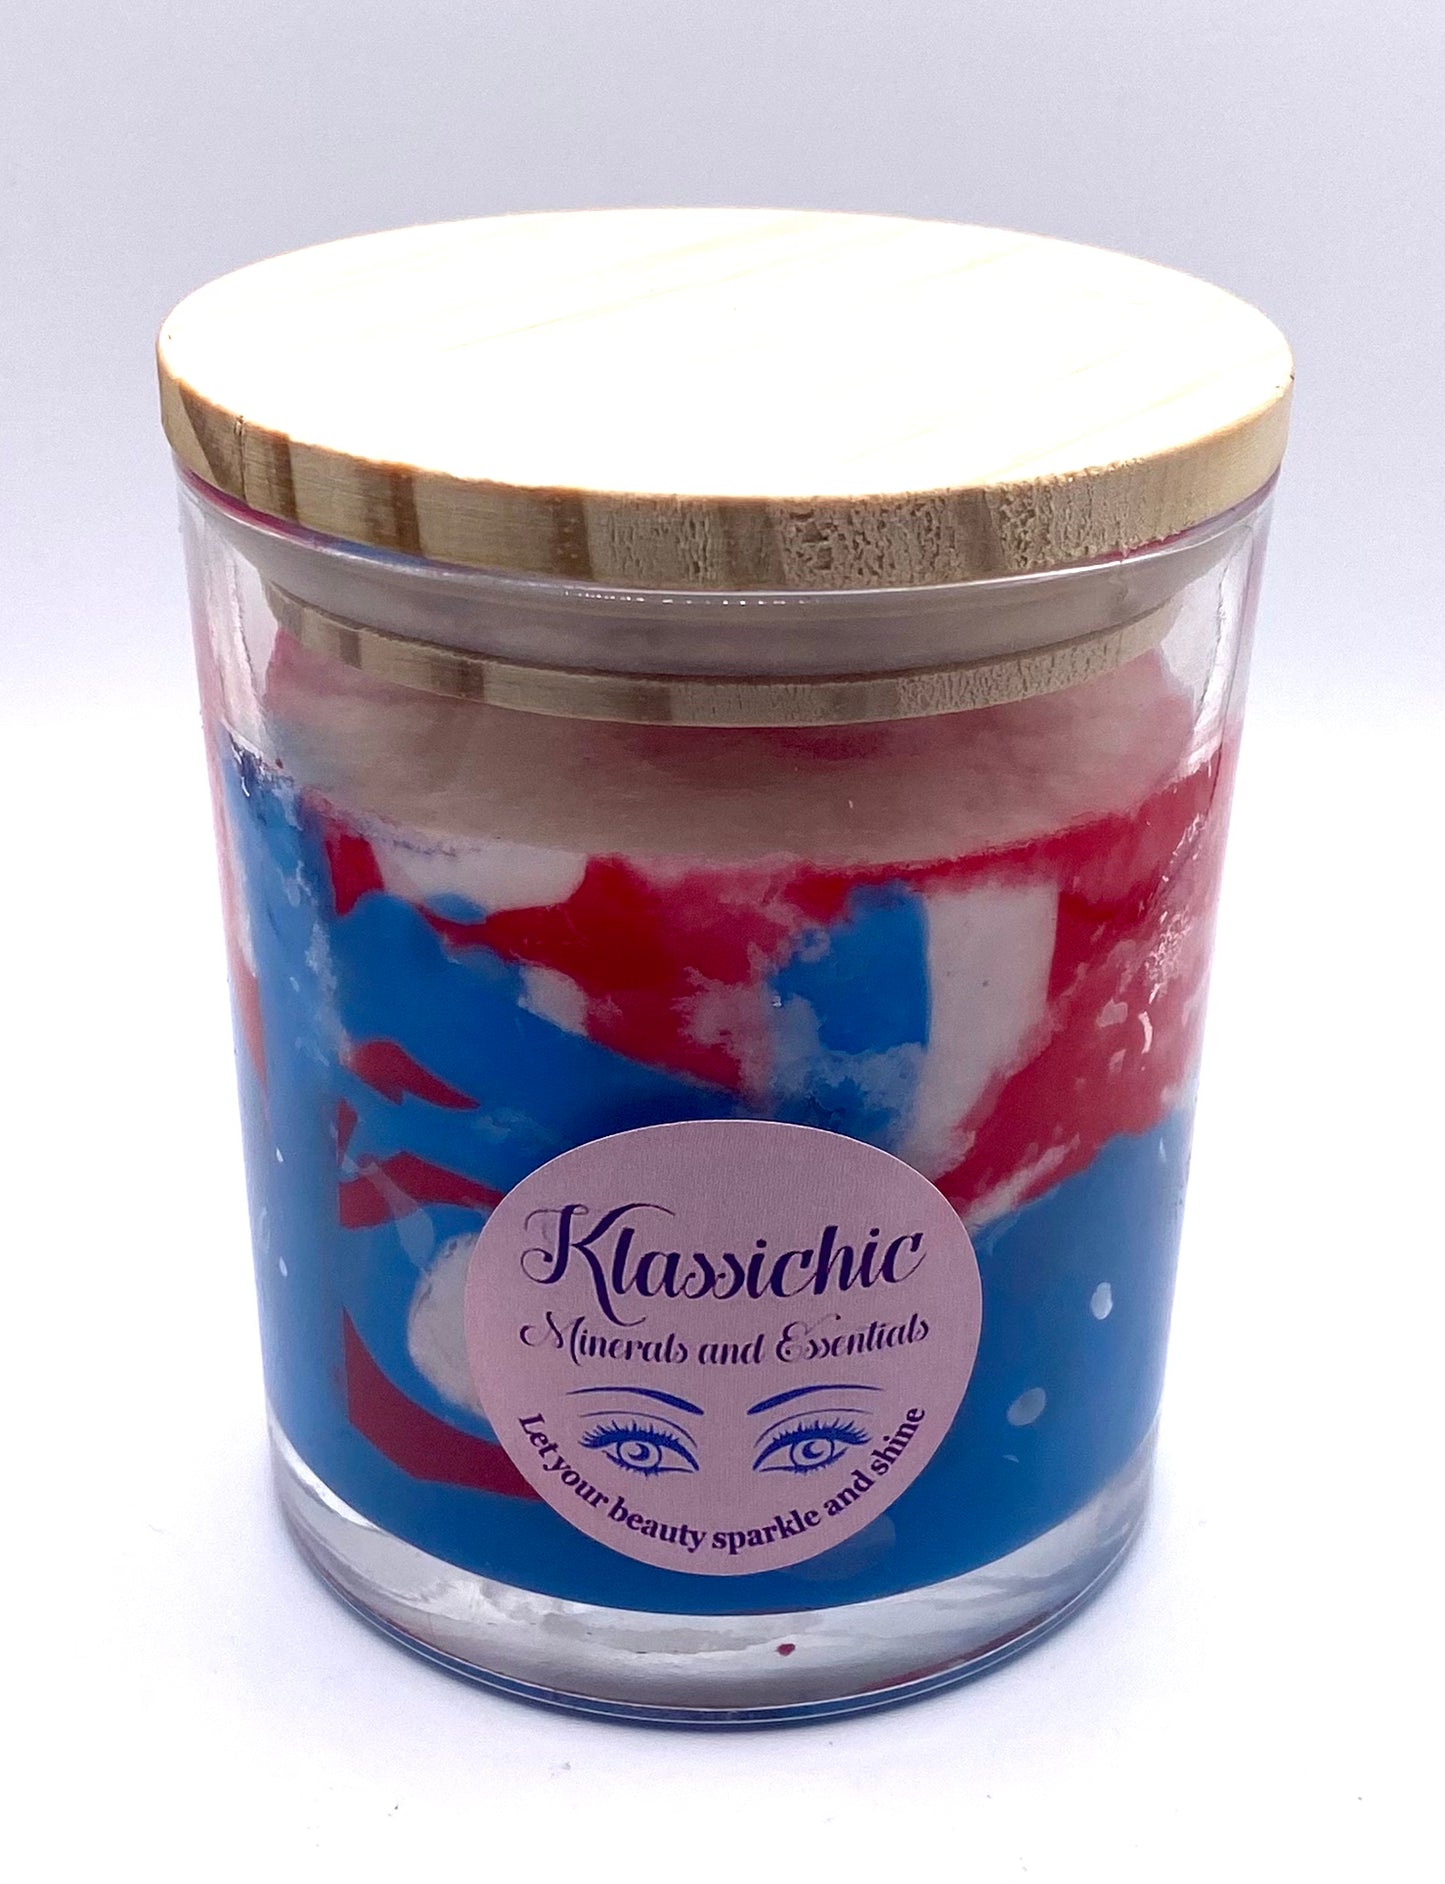 Wildberry Scented Red, White, and Blue Candle